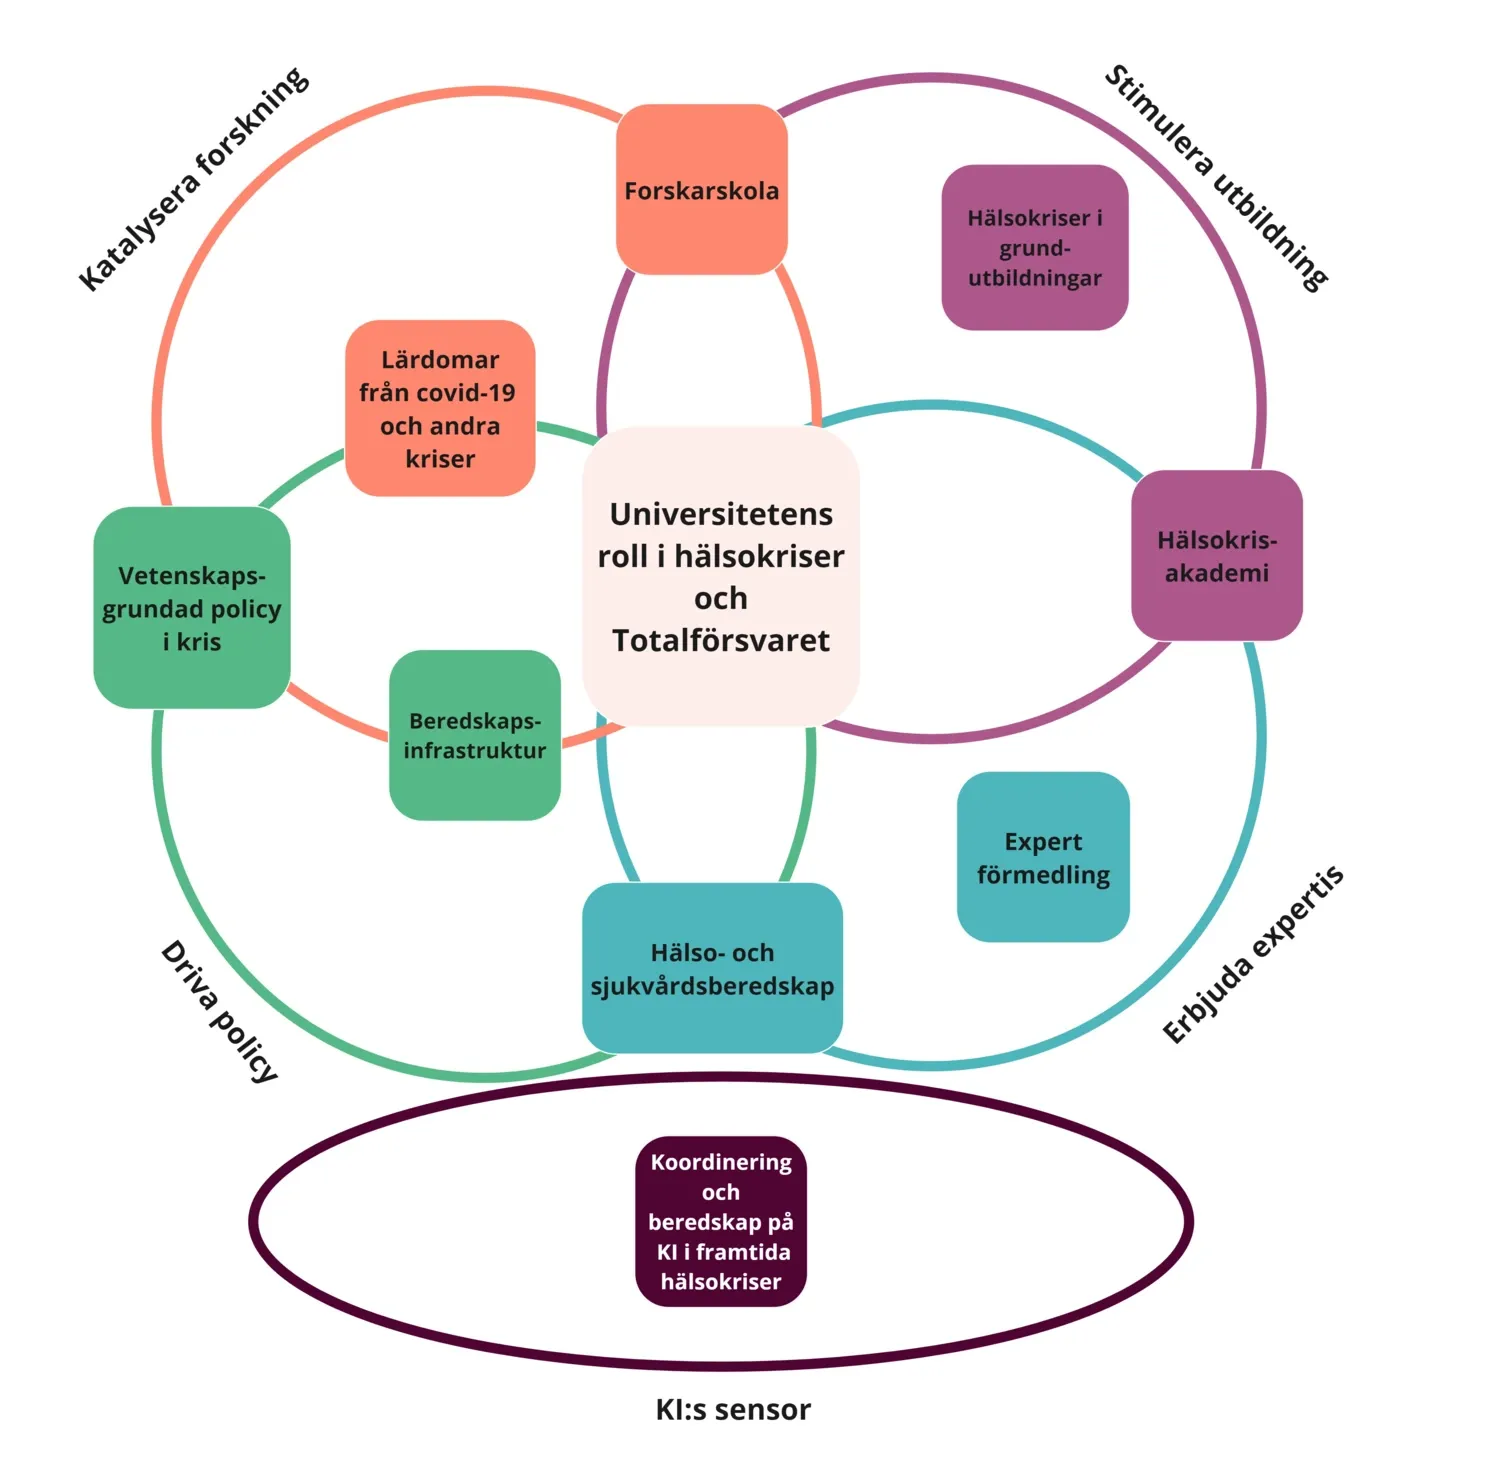 Overlapping circles. In the circles it says: learning from covid-19, Research school, health crises in undergraduate education, health crises accademy, expert mediation, health care preparedness and much more undergr